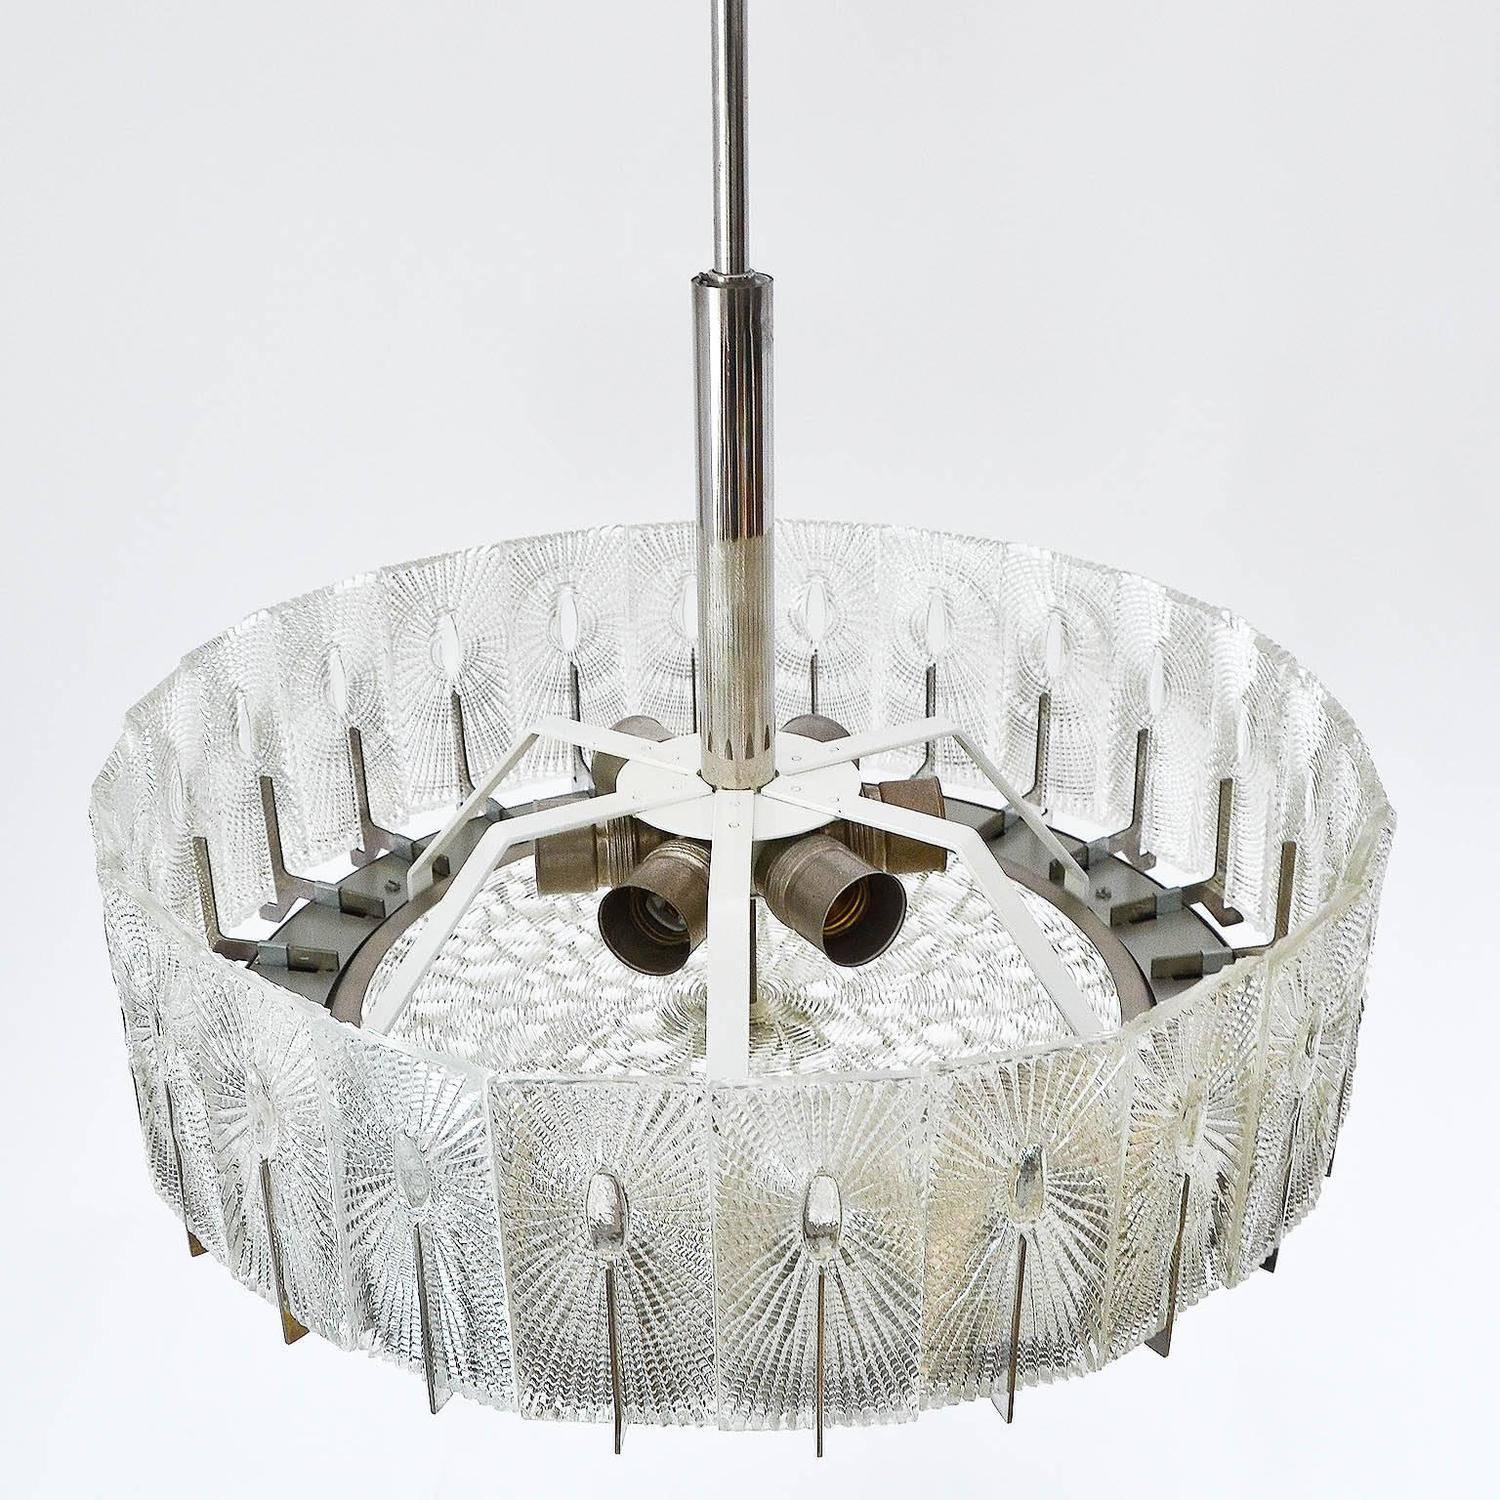 Enameled Chandelier by Rupert Nikoll, Textured Glass and Nickel, 1960